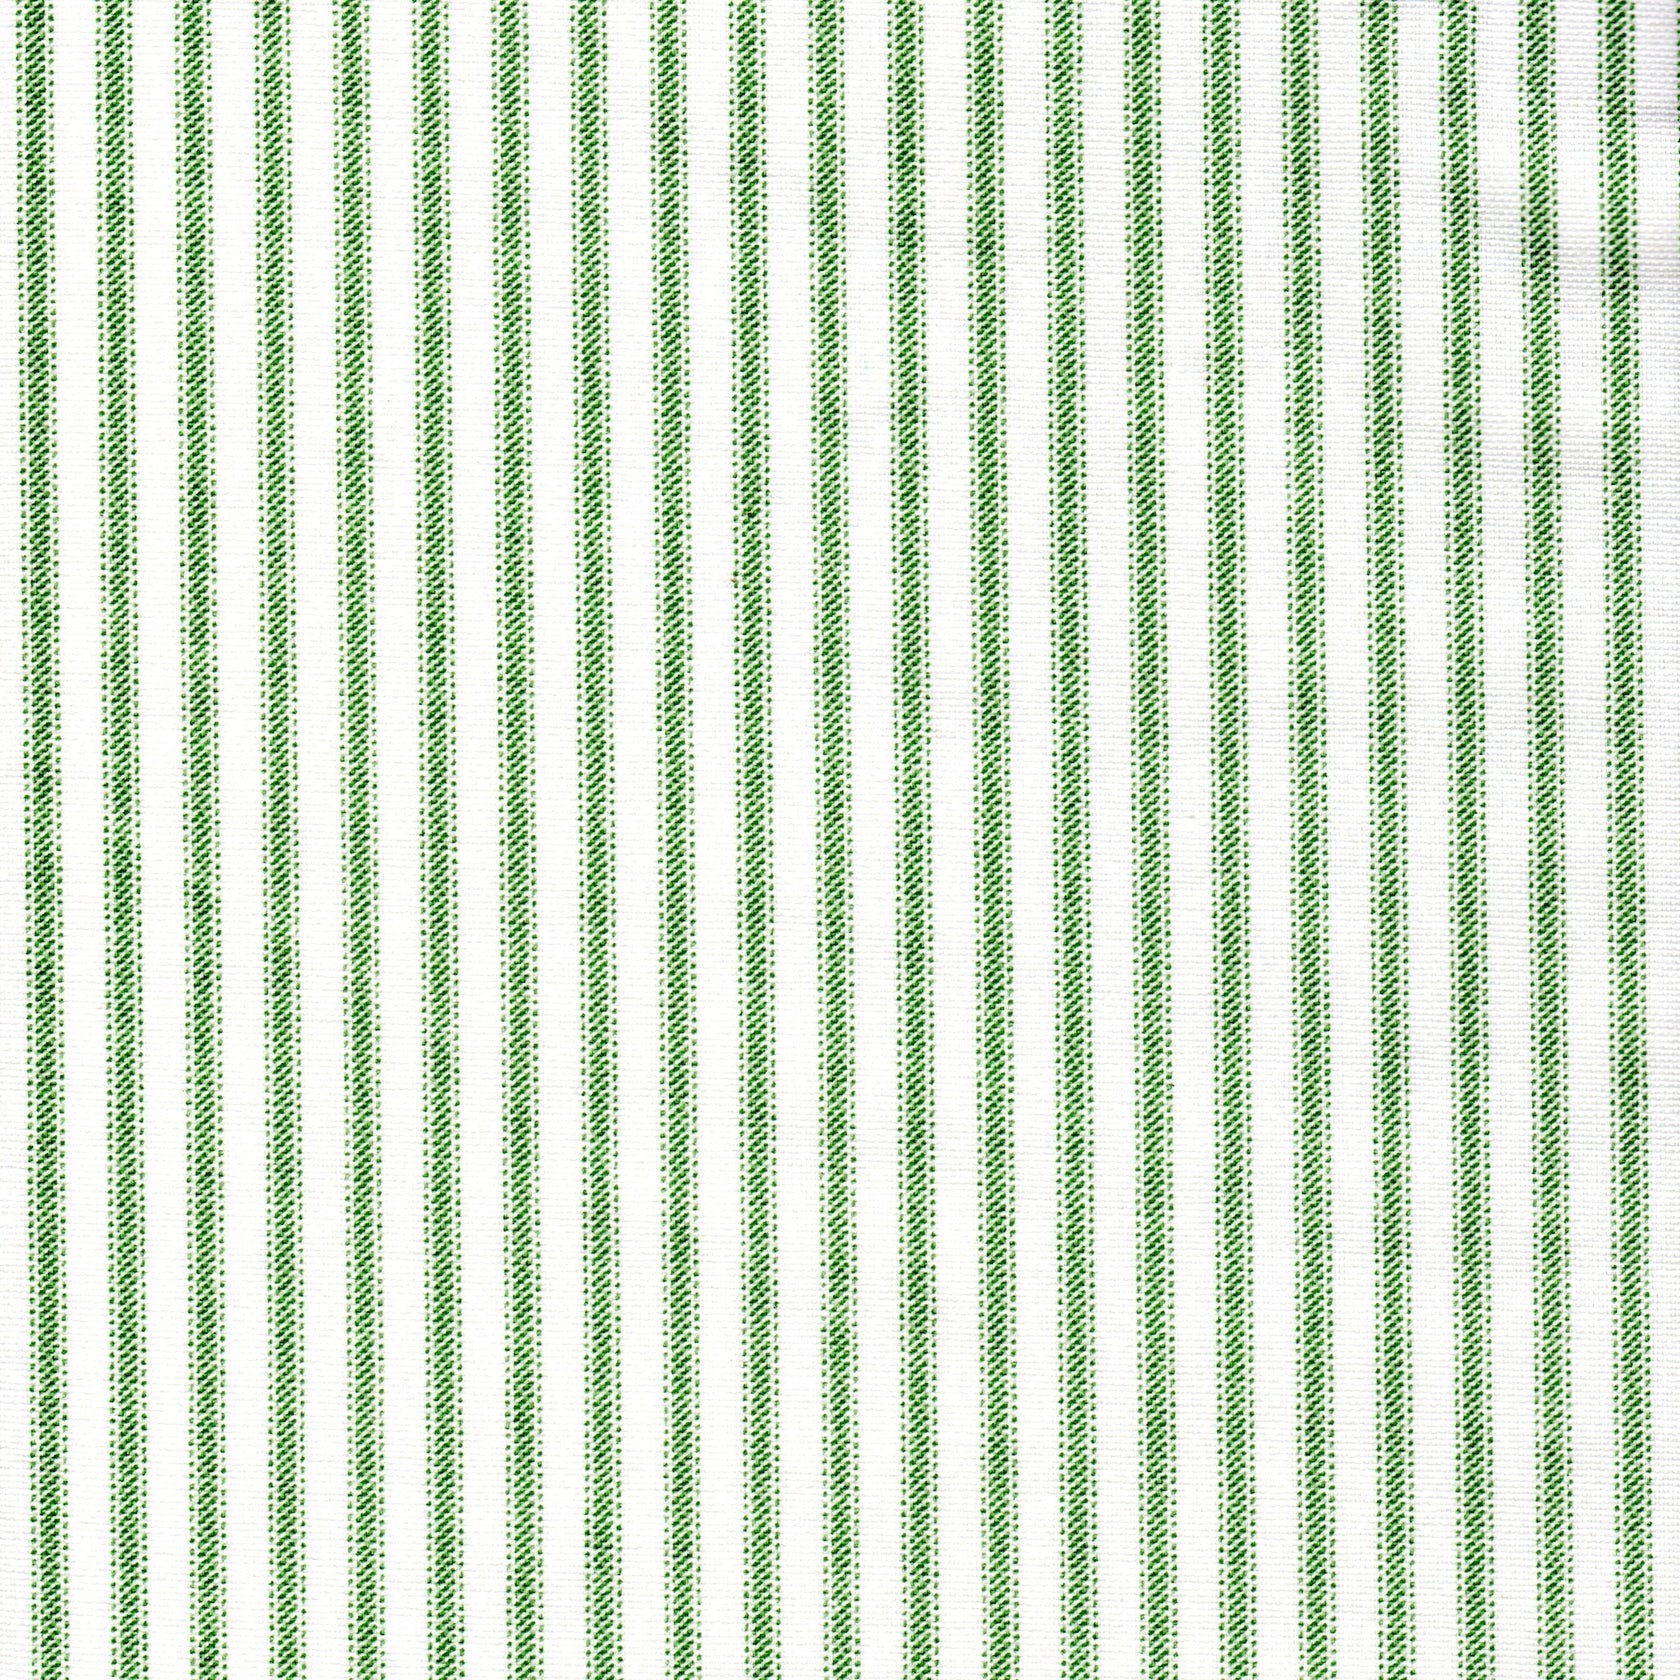 tailored bedskirt in Classic Pine Green Ticking Stripe on White